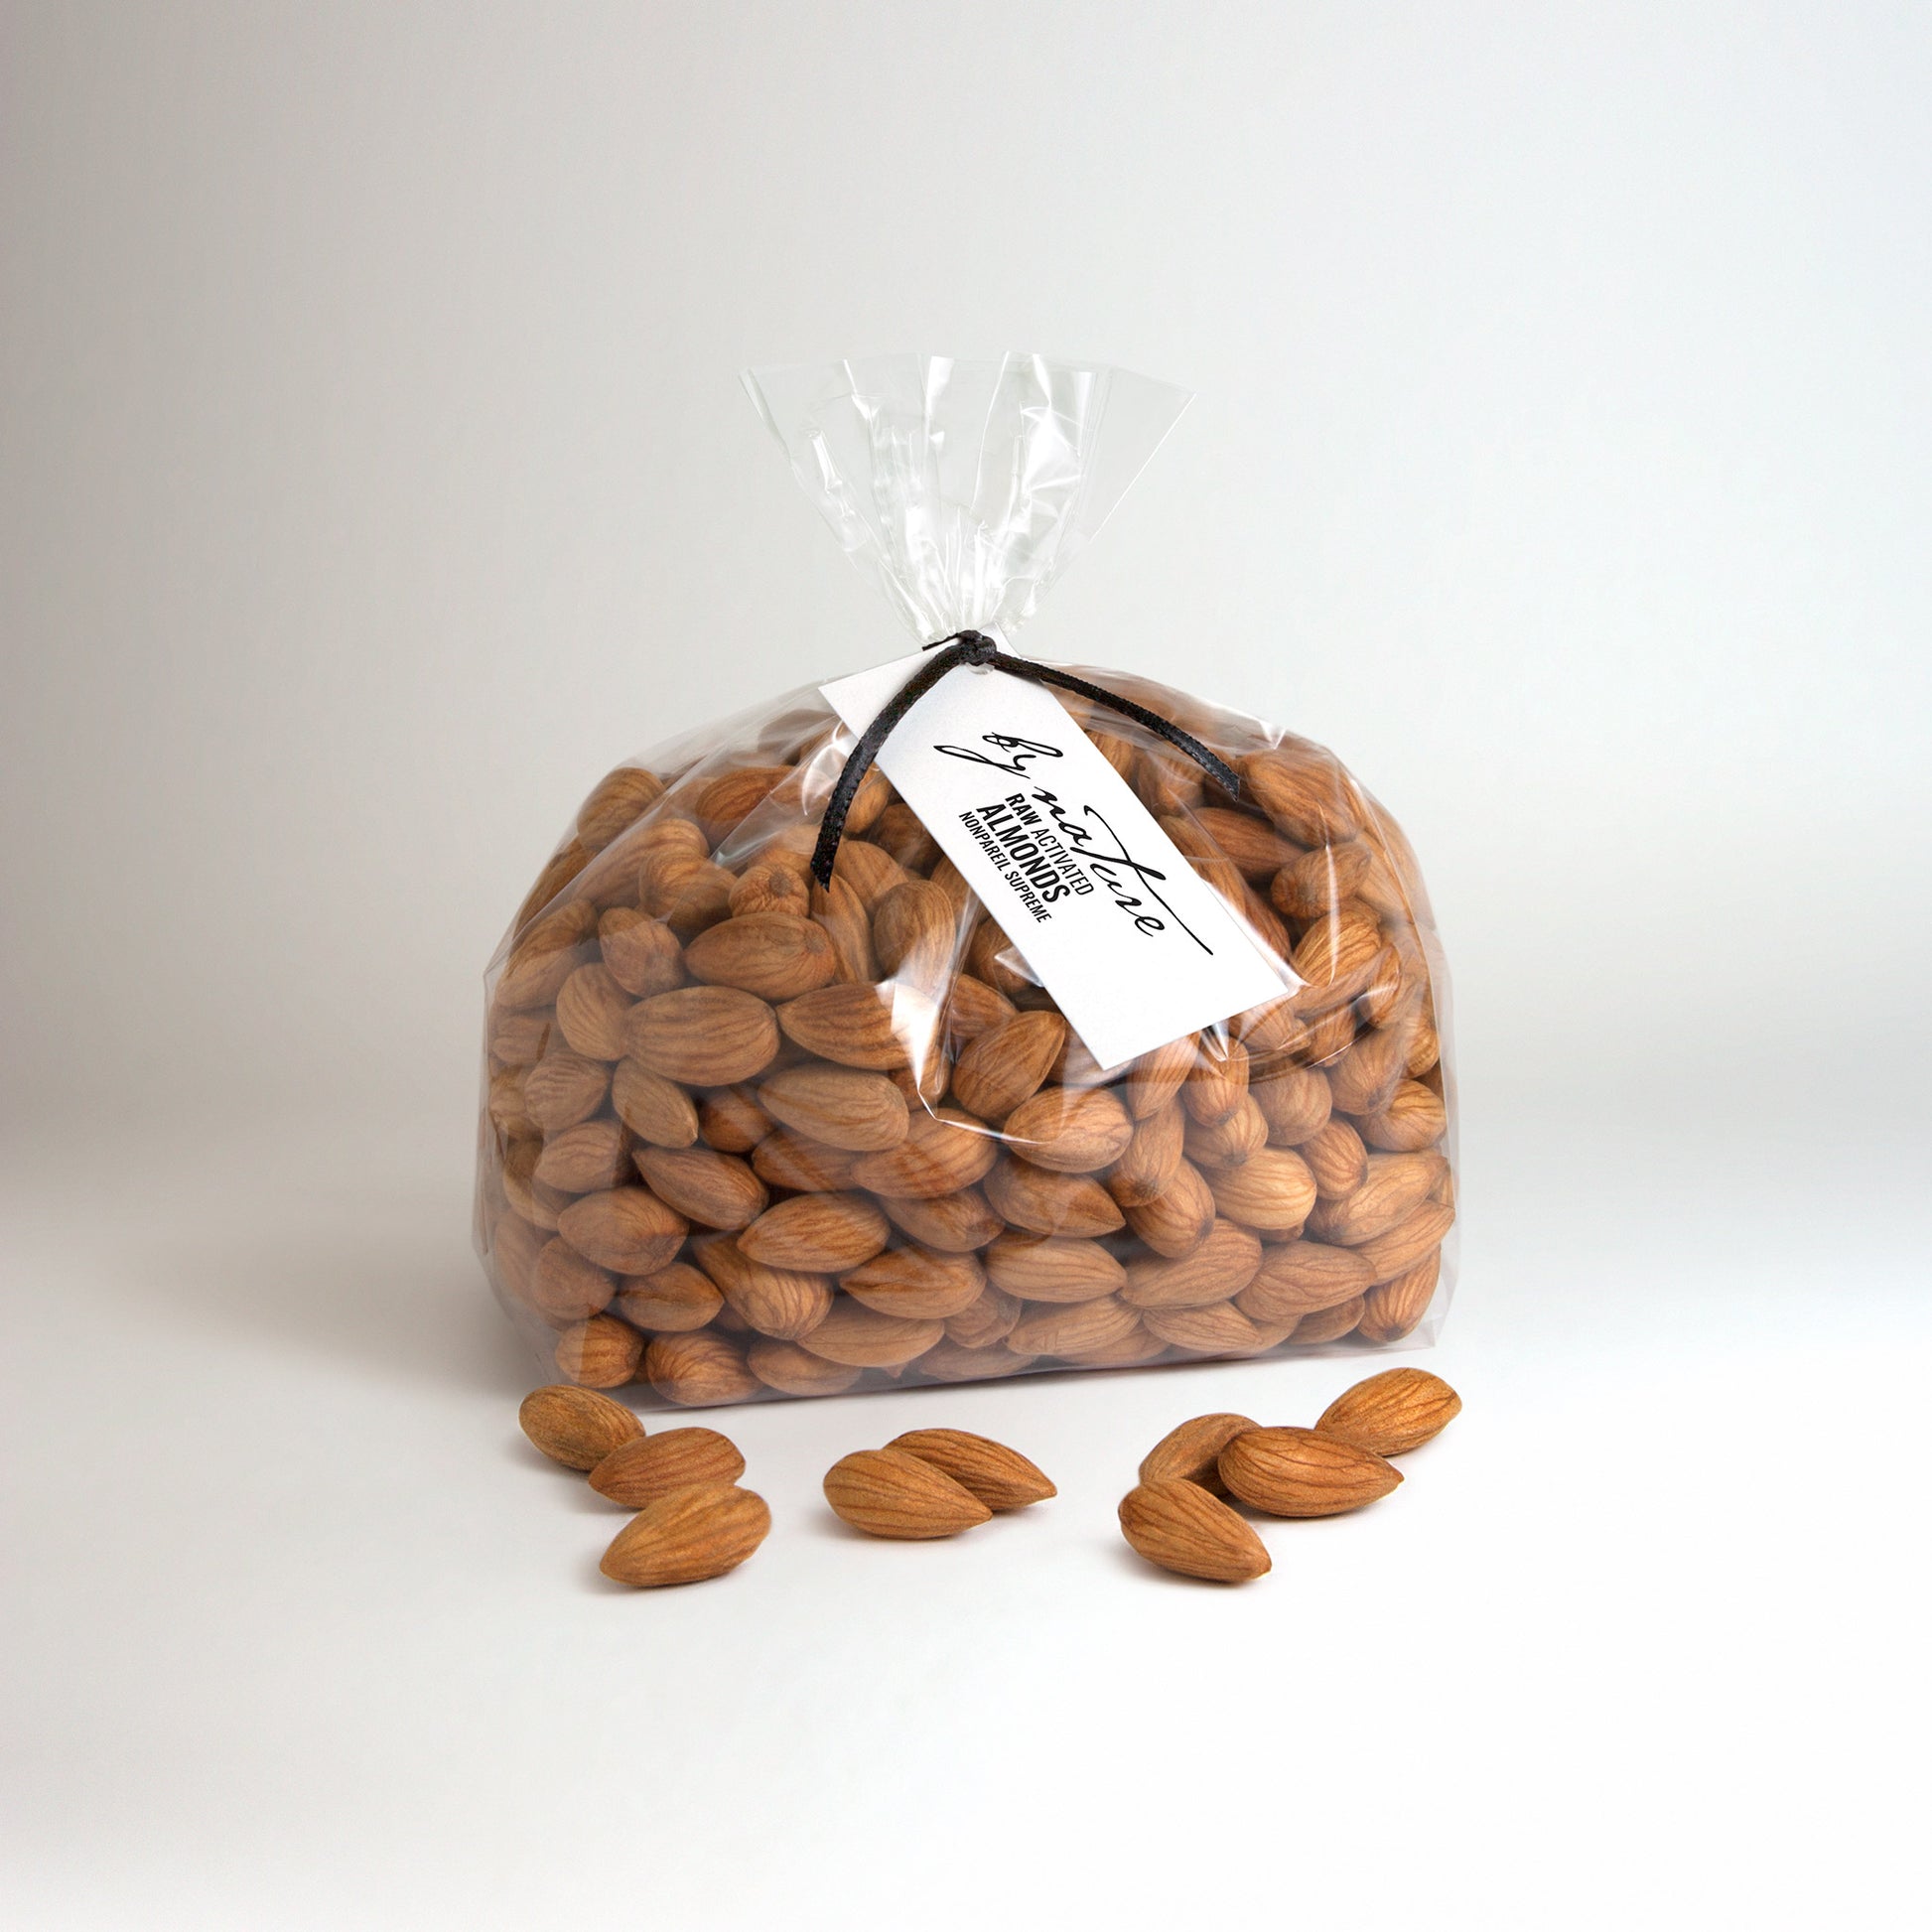 BY NATURE Activated Almonds, 500g - Nonpareil Supreme variety, raw, unpasteurised, dried not roasted.